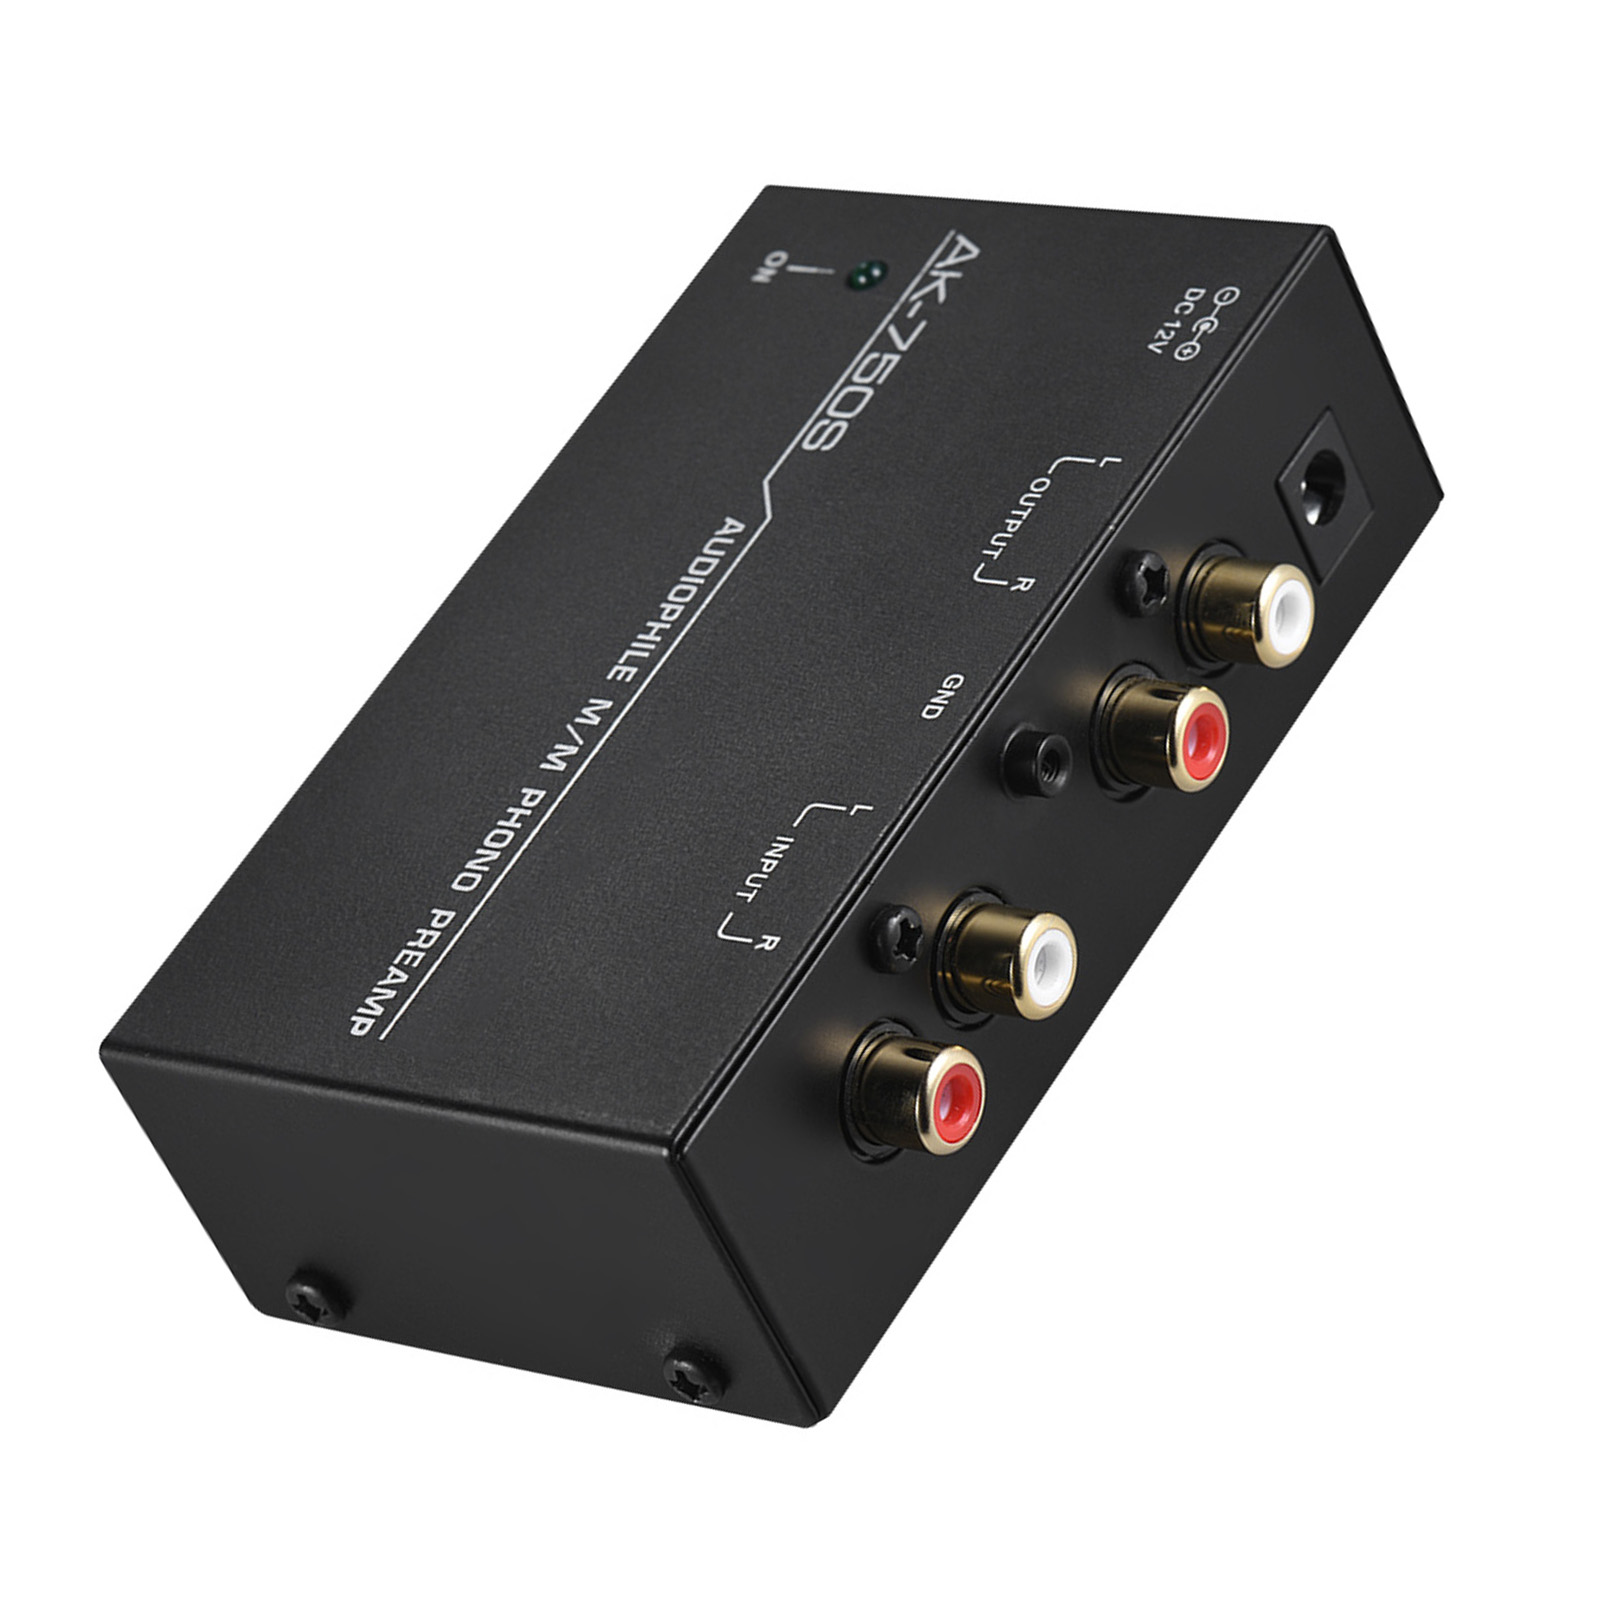 Walmeck Audiophile MM Phono Preamp Preamplifier with Level Controls RCA Input & Output Interfaces - image 5 of 5